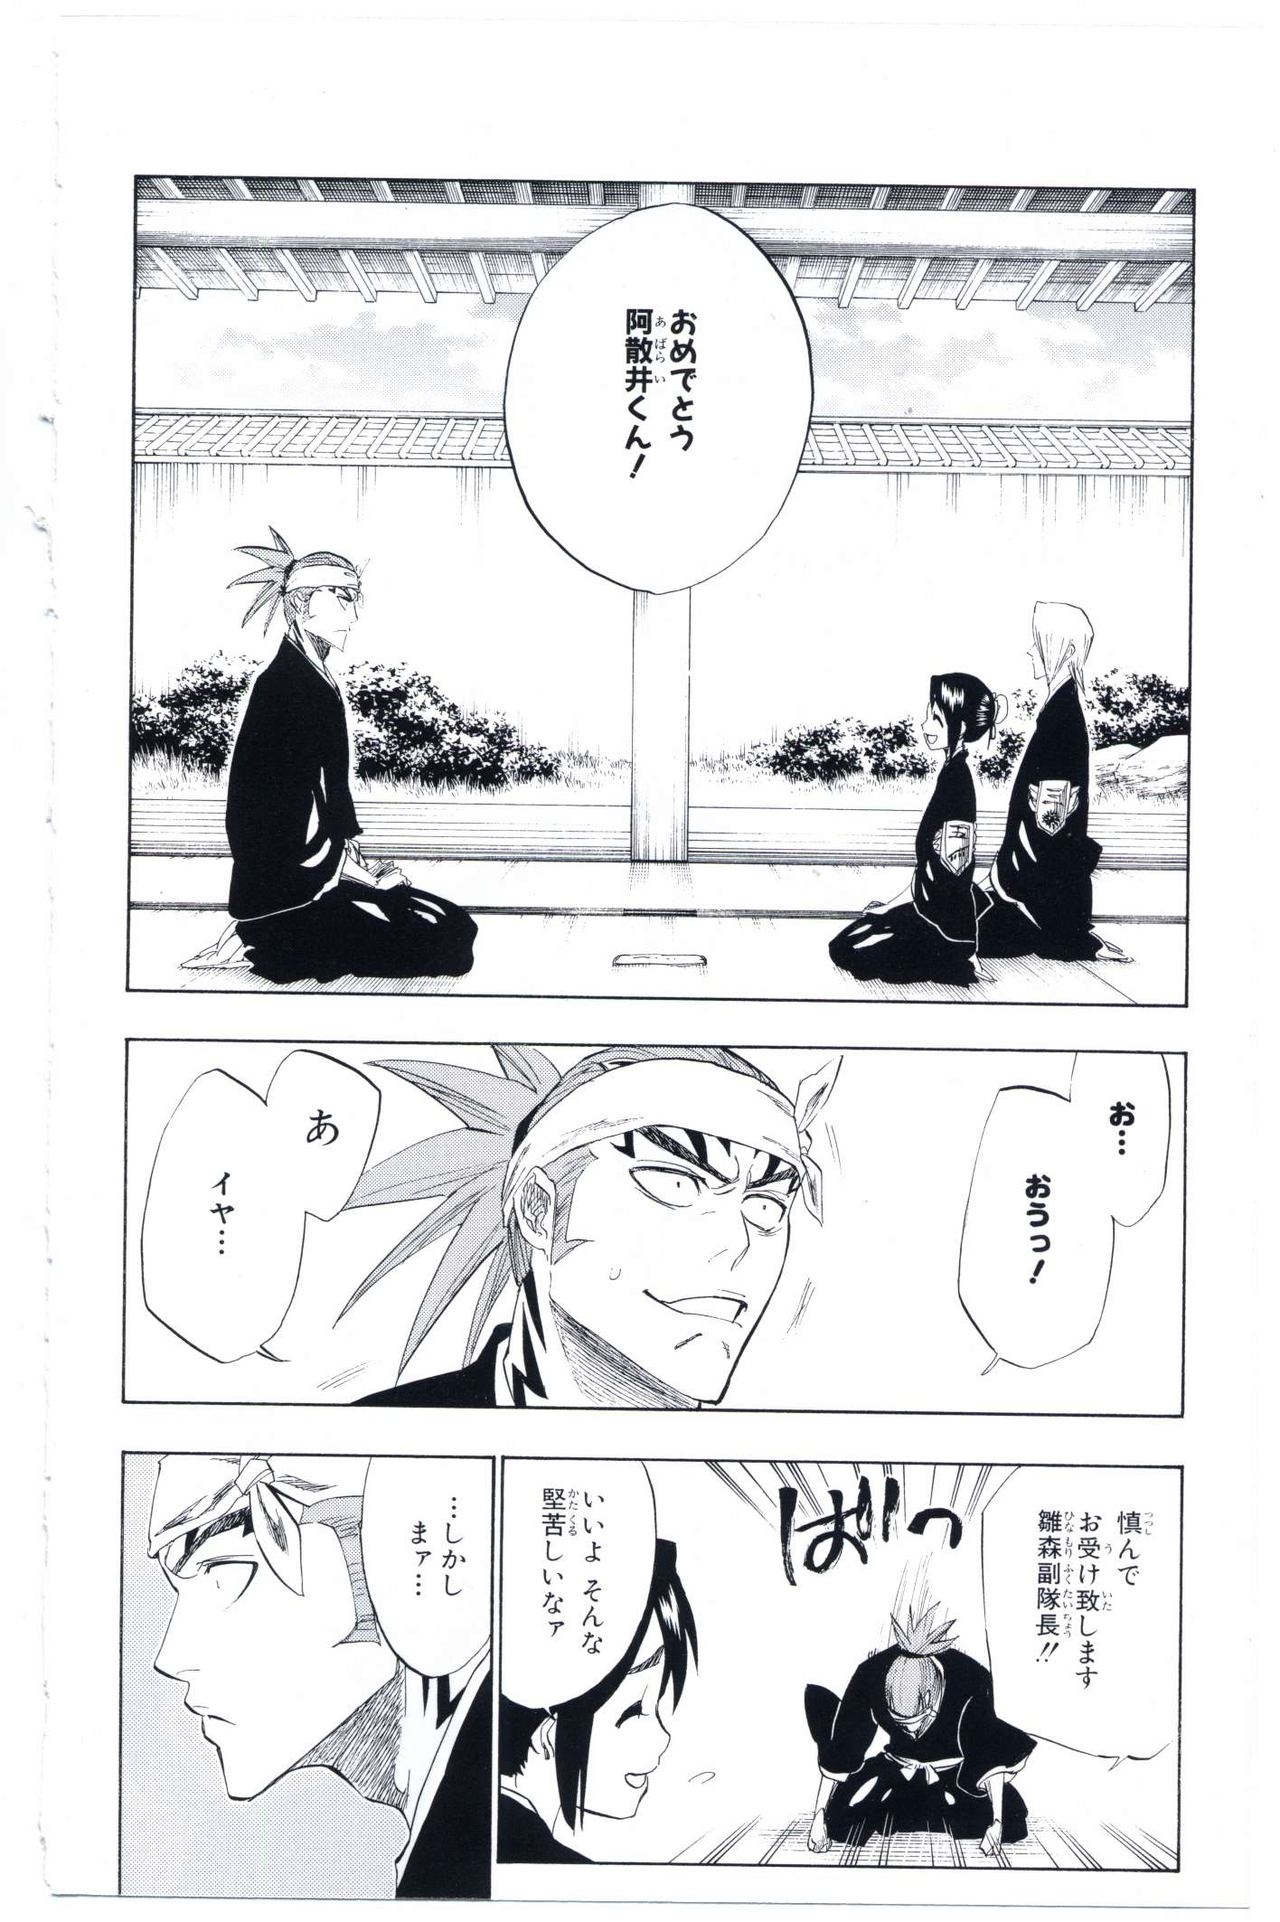 Bleach: Official Animation Book VIBEs 210